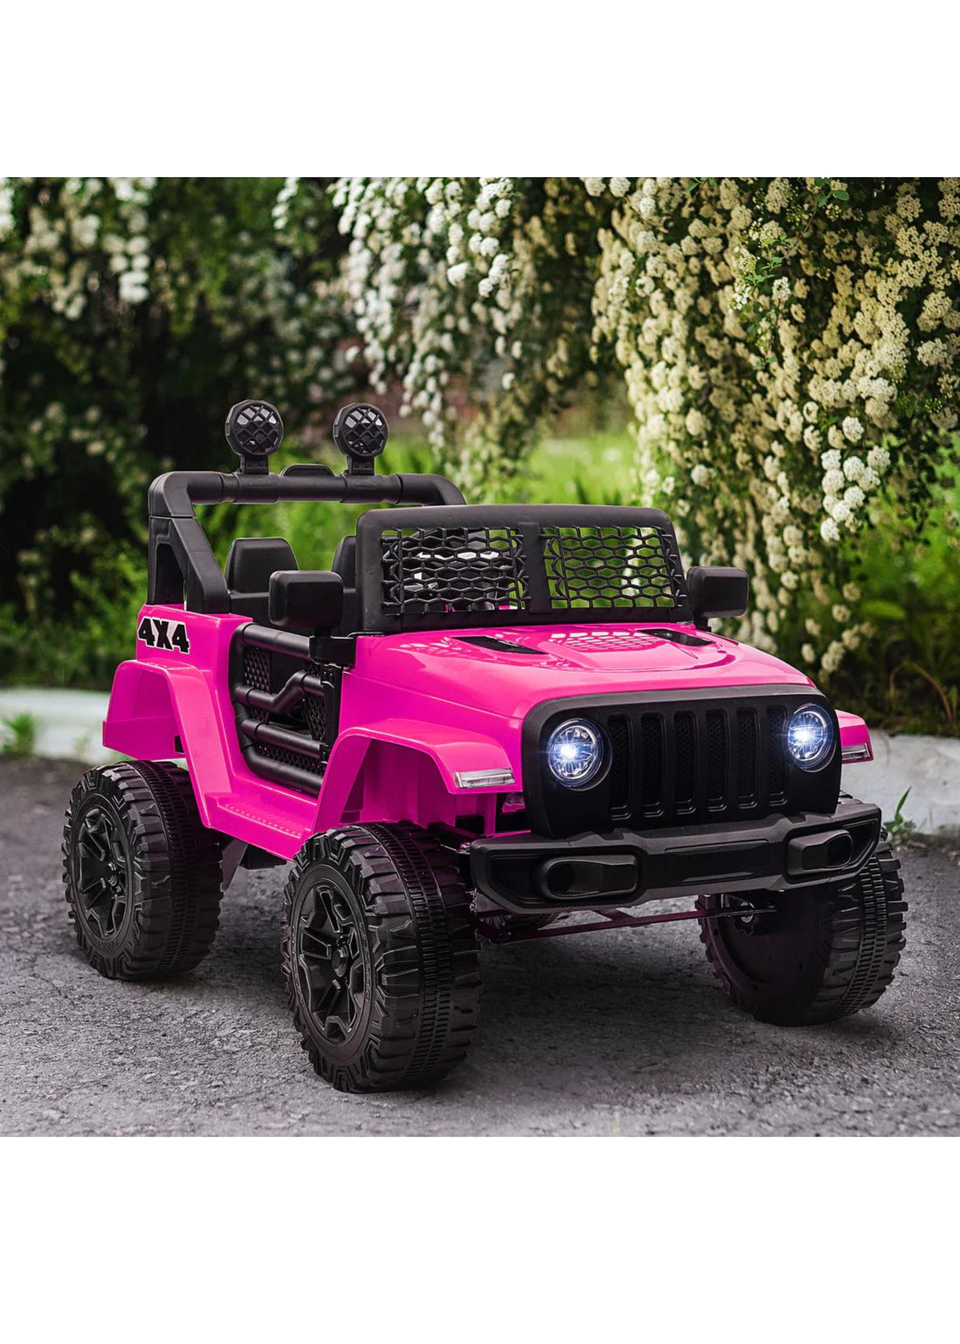 HOMCOM 12V Kids Electric Ride On Car Truck Off-road Toy with Remote Control (Pink)